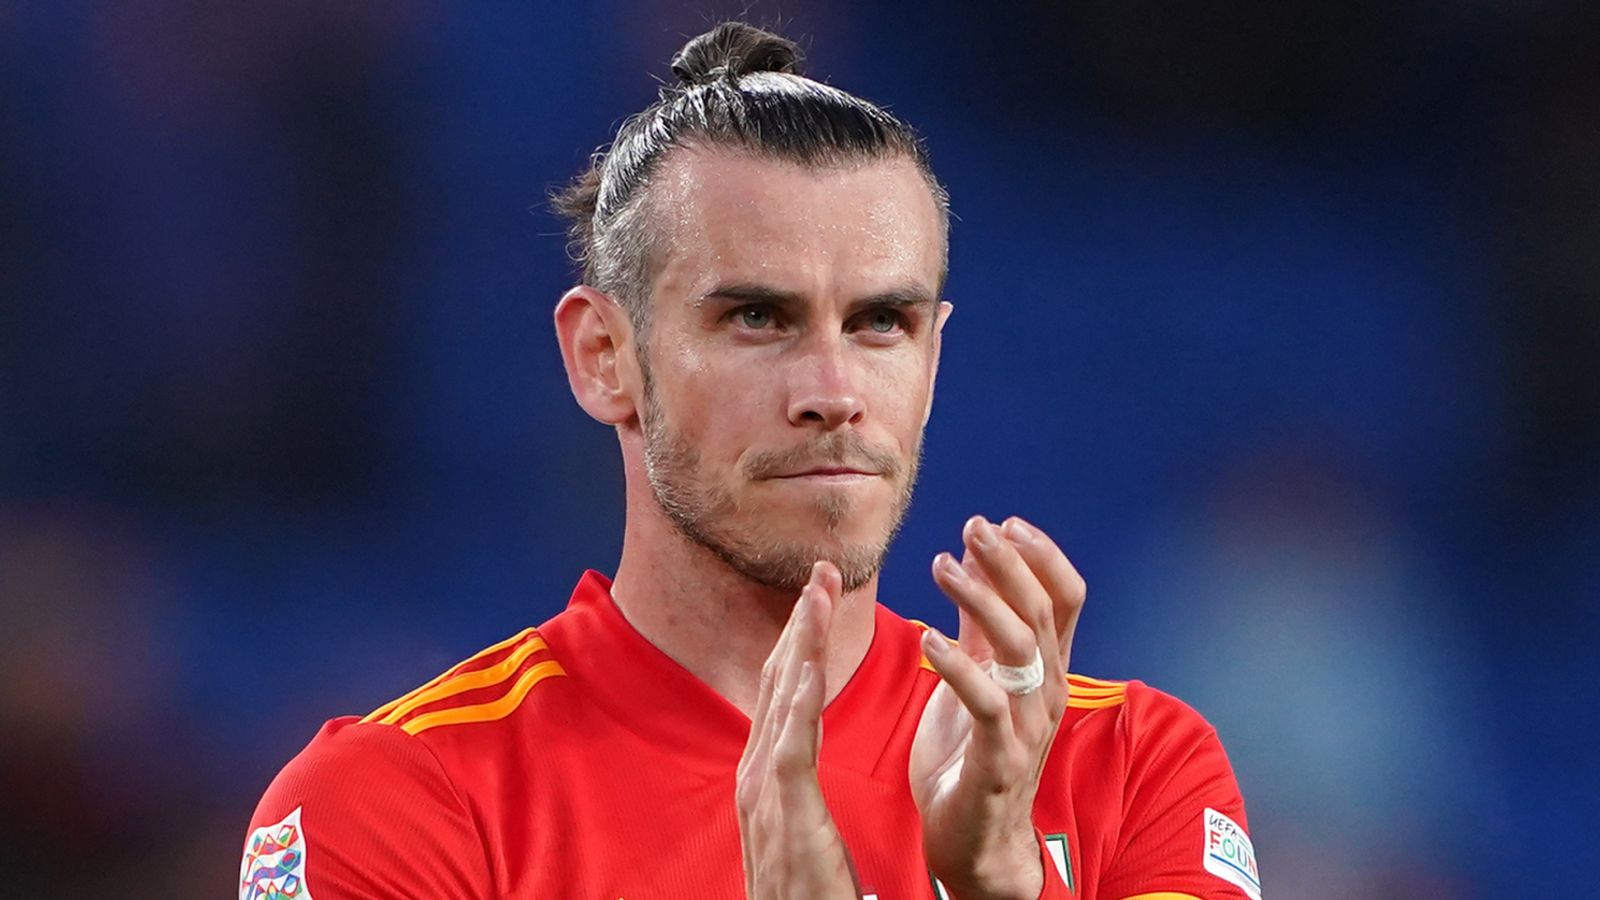 Gareth Bale agrees to join MLS side Los Angeles FC on one-year deal after leaving Real Madrid